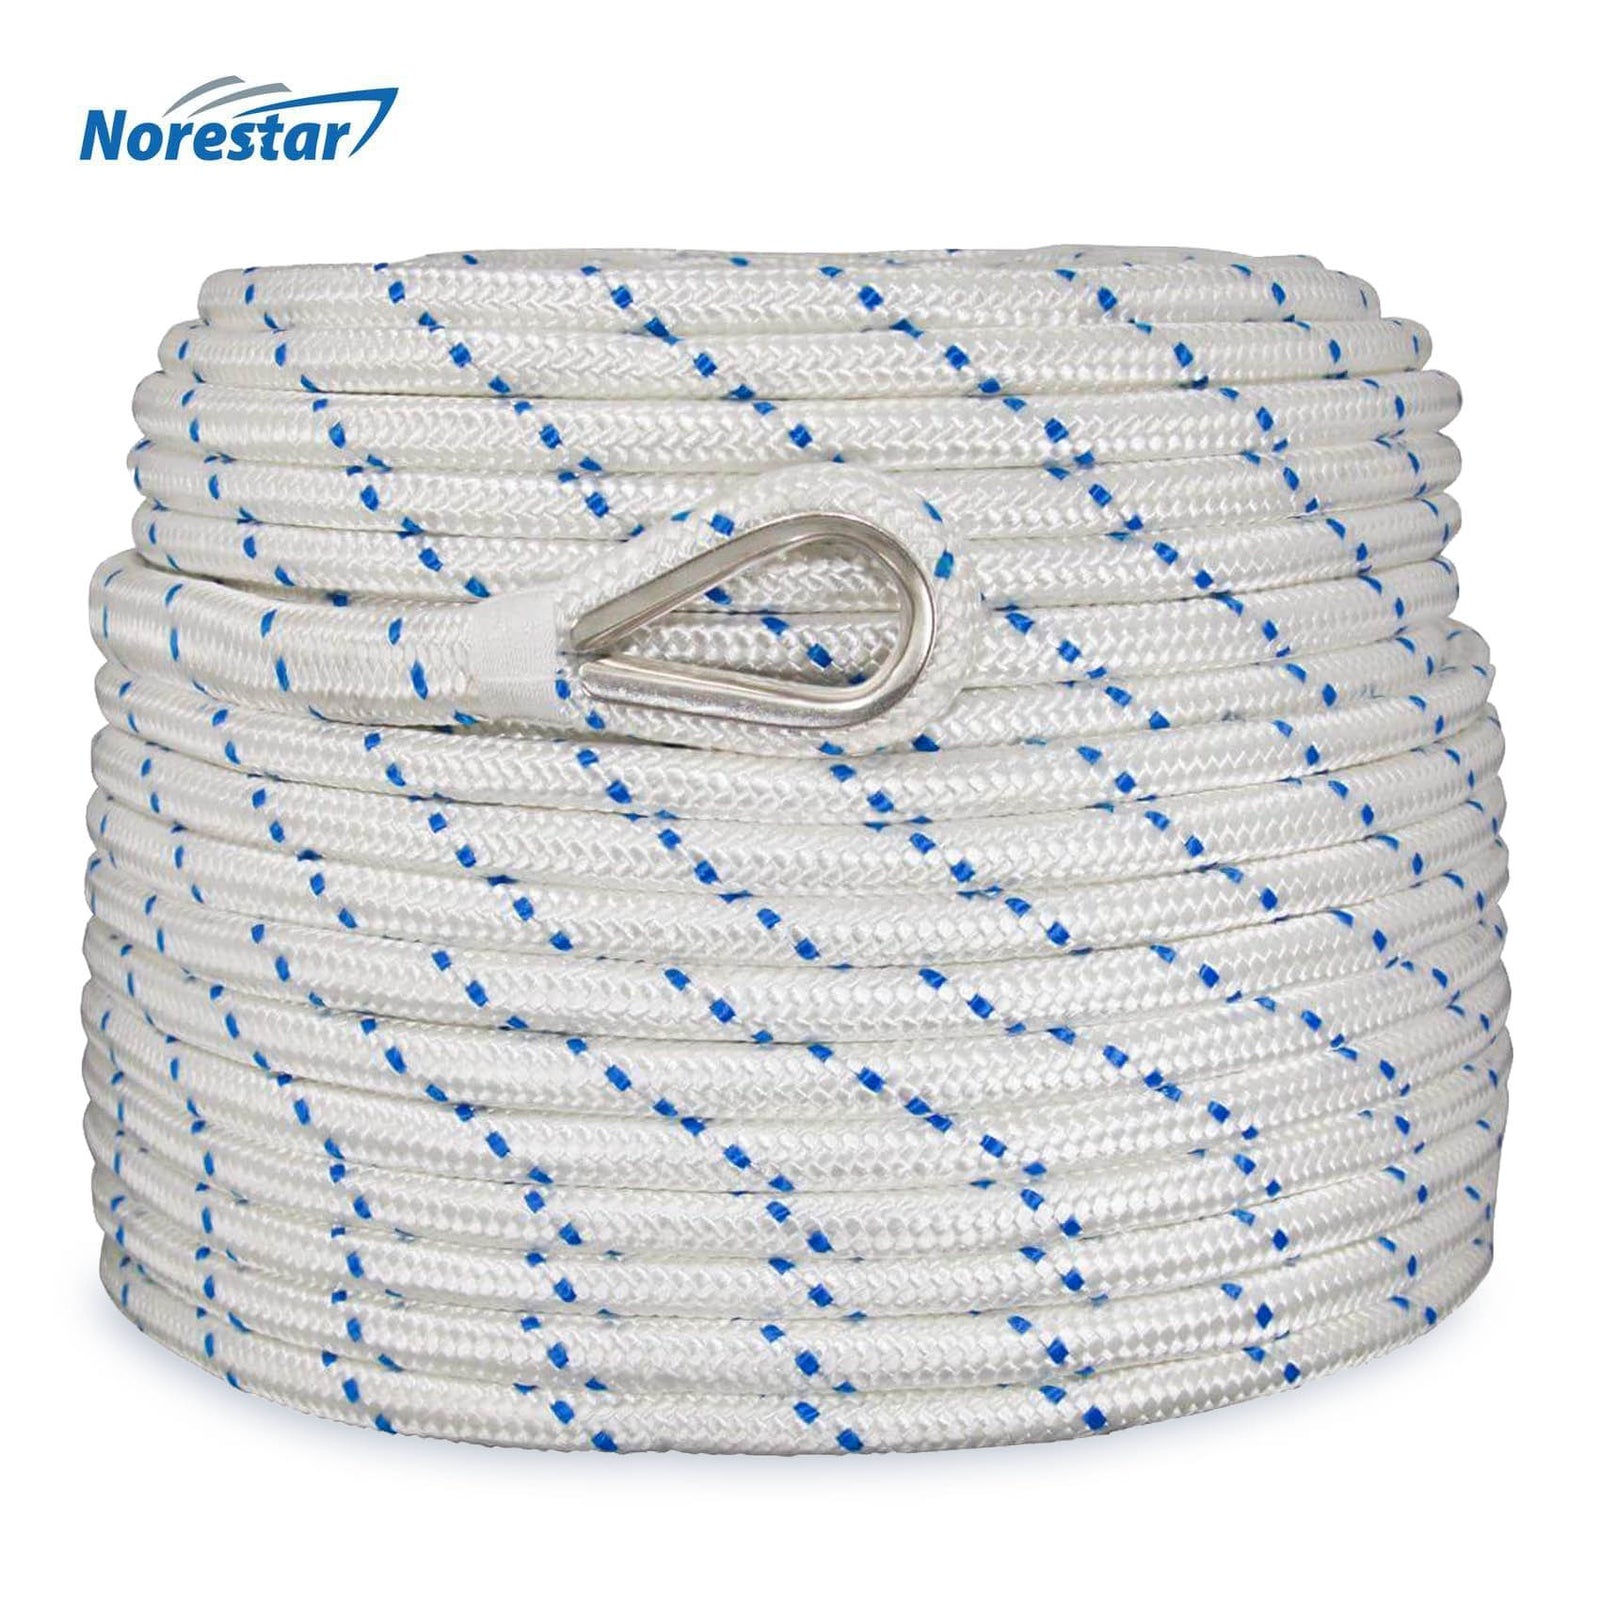 Norestar Double-Braided Nylon Anchor Rope - 1/2"